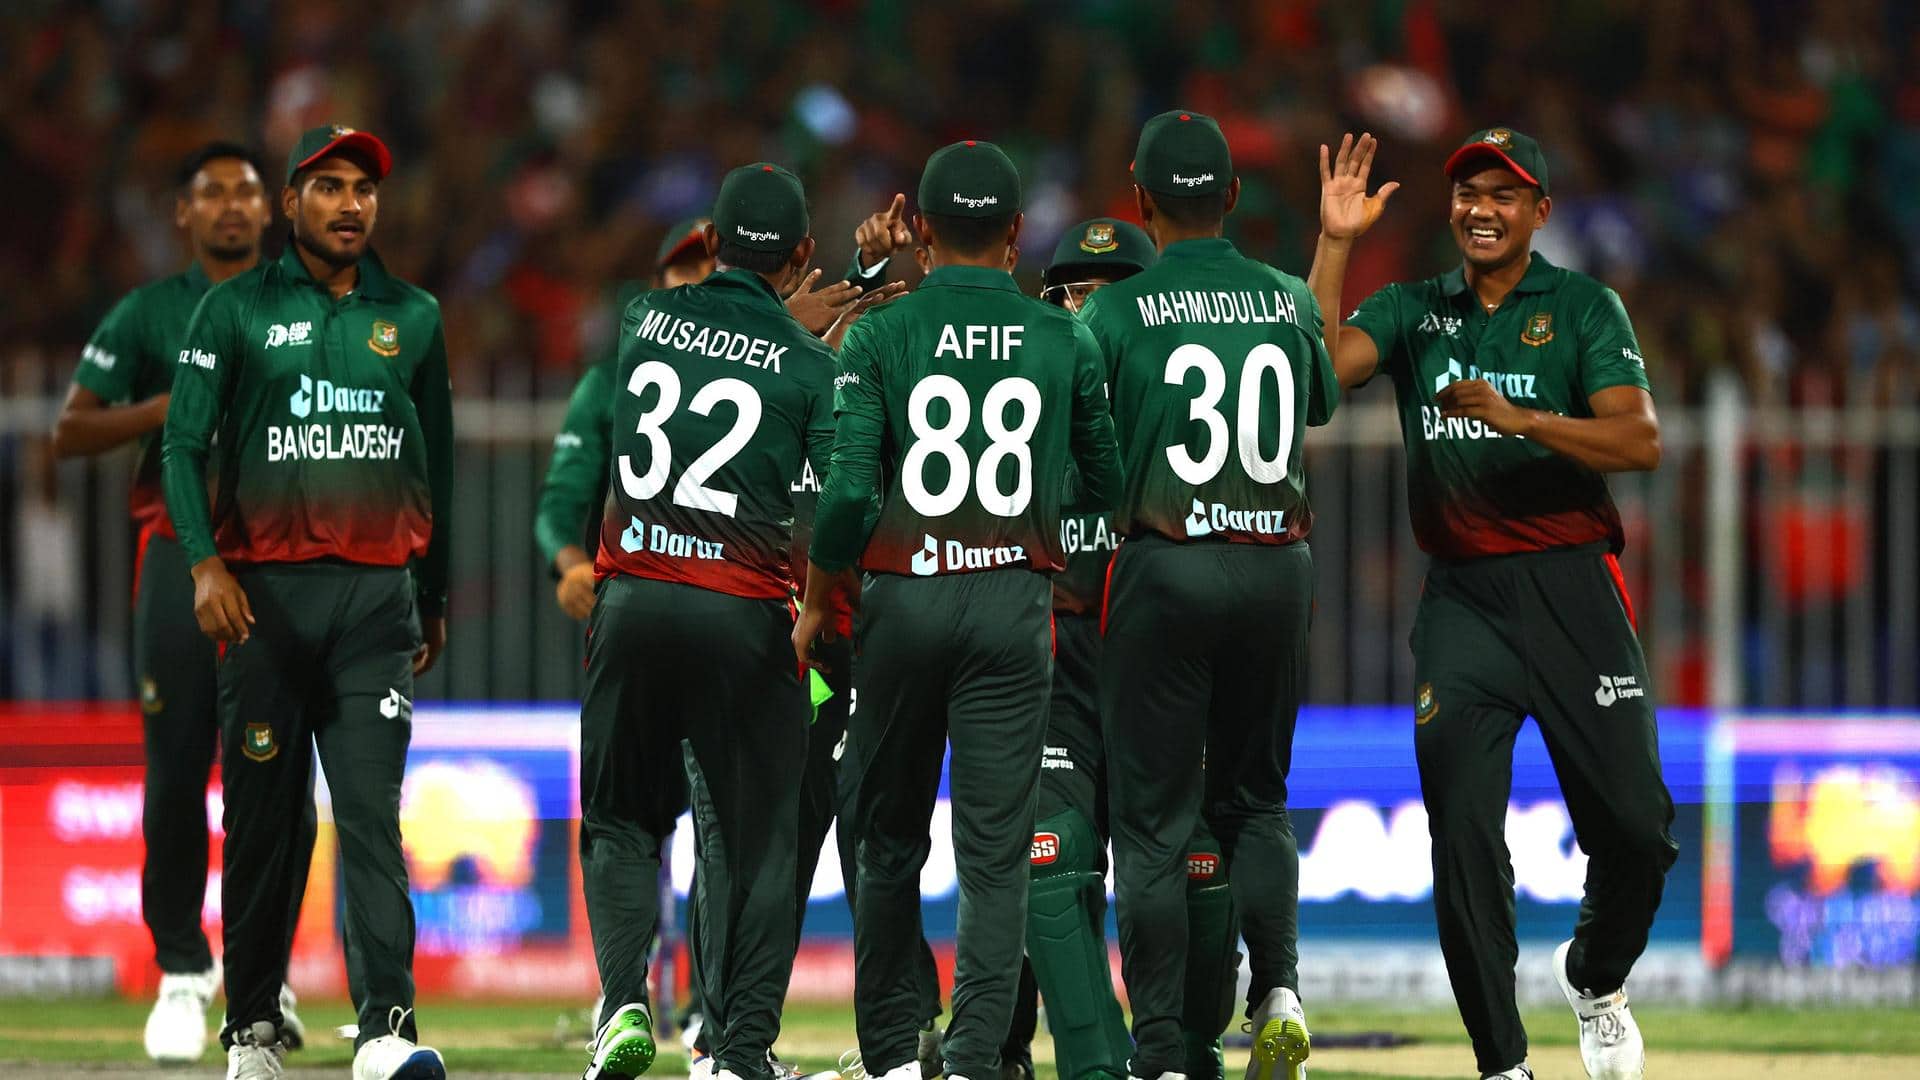 Decoding Team Bangladesh's stats in Asia Cup